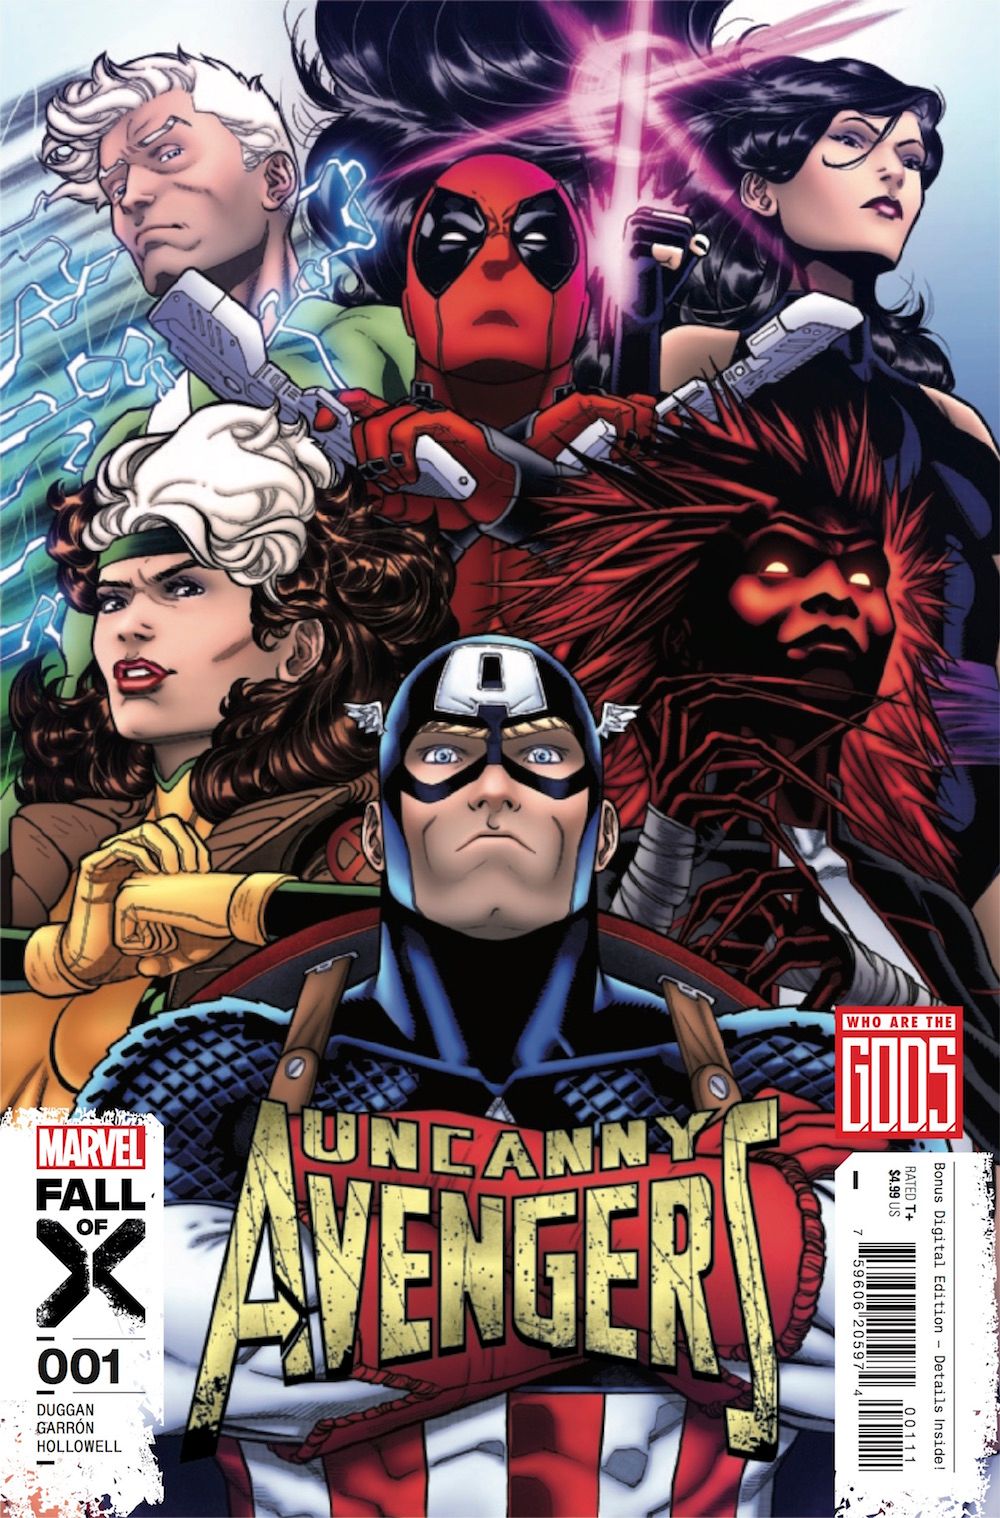 The cover of Uncanny Avengers #1. Steve Rogers (Captain Marica), Rogue and Penance stand together. Offscreen are Quicksilver, Psylocke and Deadpool.